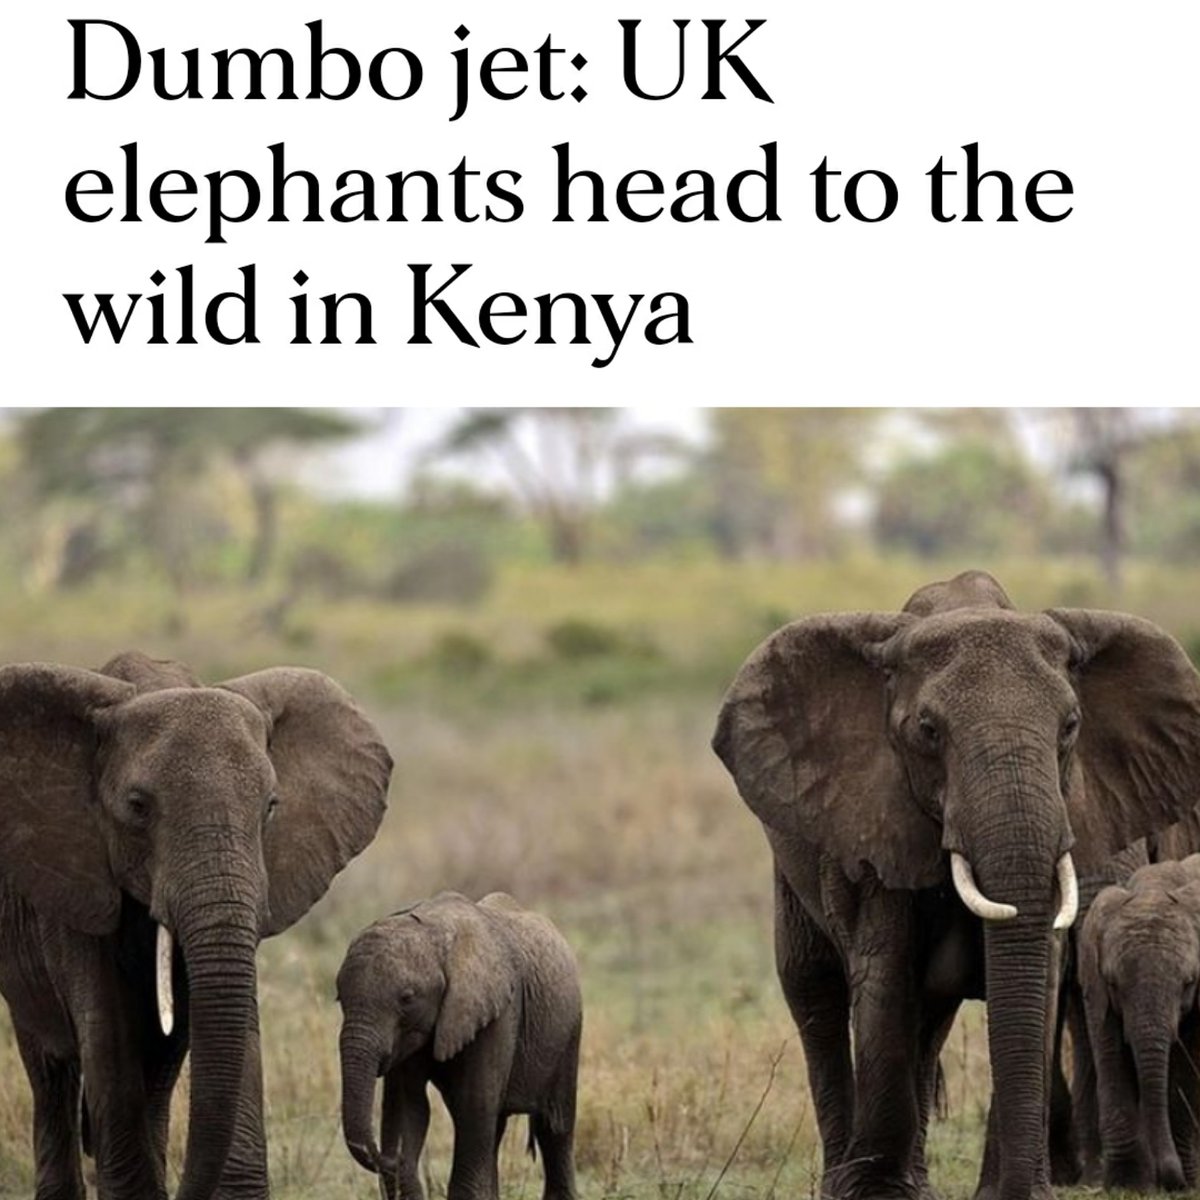 A UK charity, The Aspinall Foundation, is set to fly a herd of #elephants from a British zoo to a new home in Kenya.

nation.africa/kenya/news/dum…

#ElephantConservation #conservation #conservationnews #elephant #elephants #WildlifeRelocation #ElephantRelocation #elephantlife